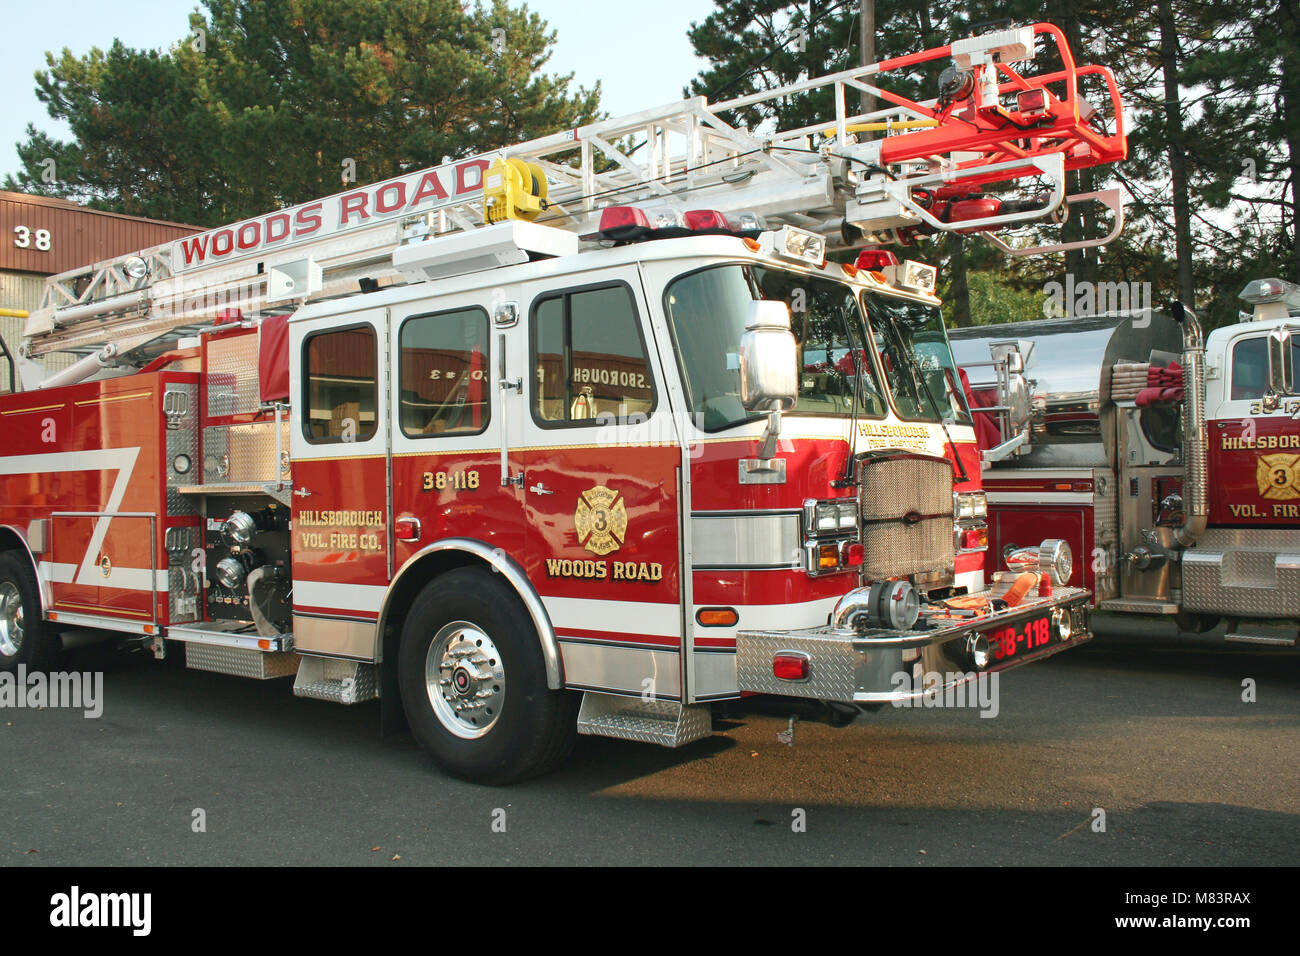 A Fire Truck parked outside a firehouse Stock Photo